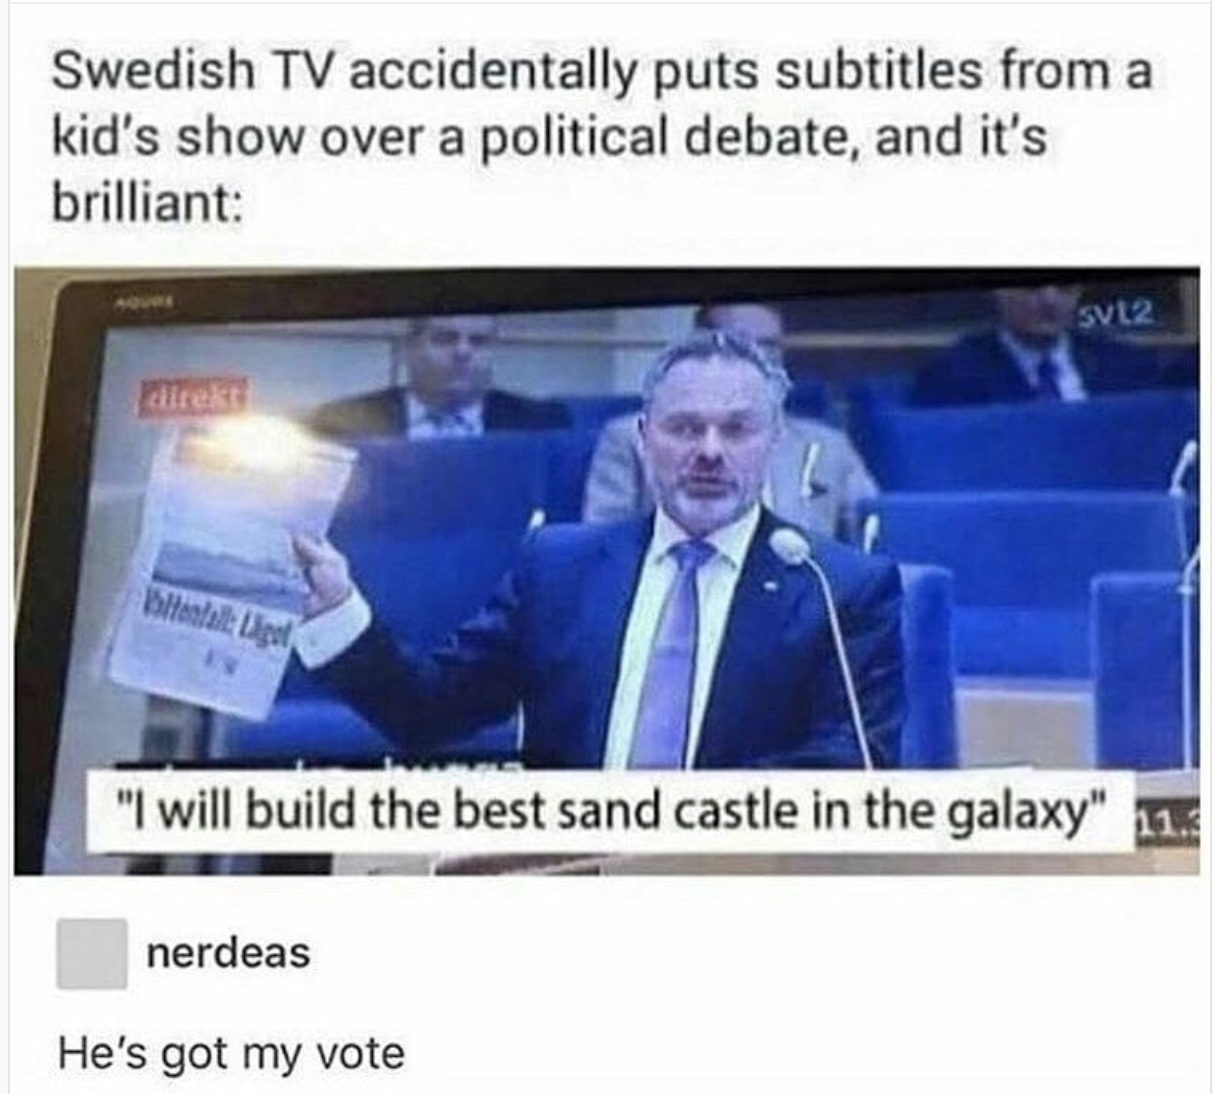 sweden memes - Swedish Tv accidentally puts subtitles from a kid's show over a political debate, and it's brilliant svt2 direkt Best "I will build the best sand castle in the galaxy" i nerdeas He's got my vote